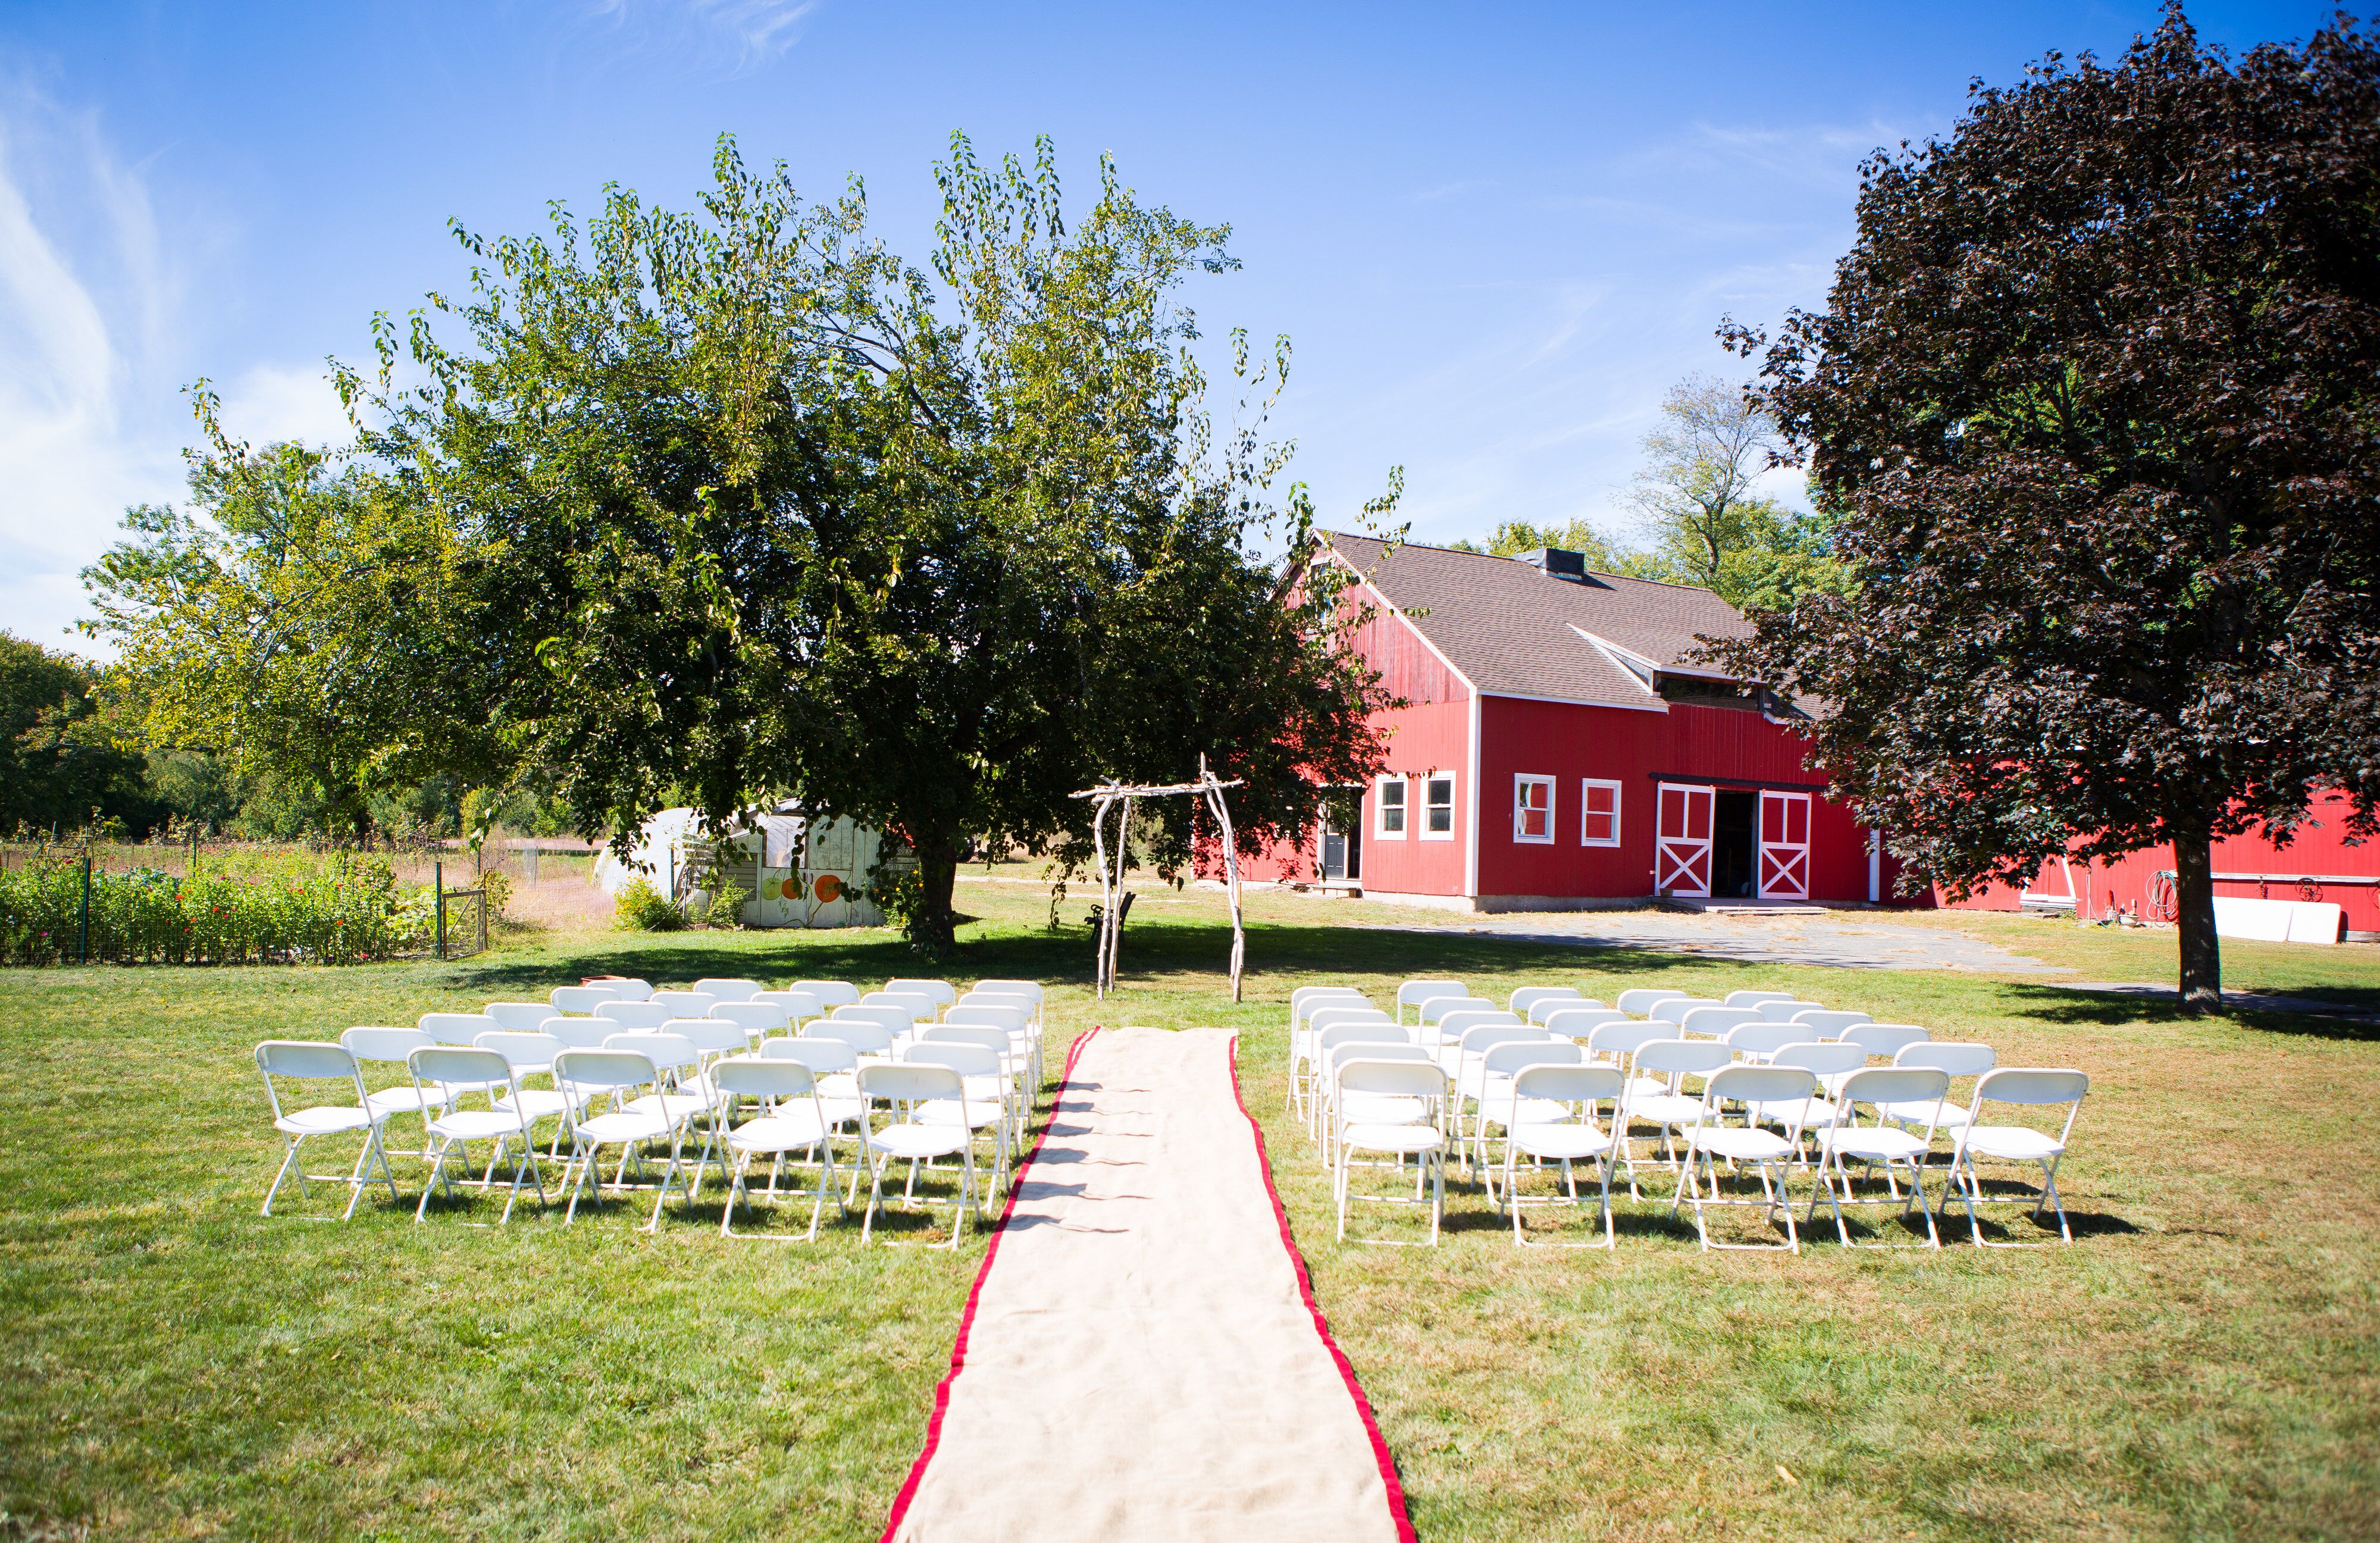  Weddings  On The Farm Reception  Venues  South Windsor  CT 